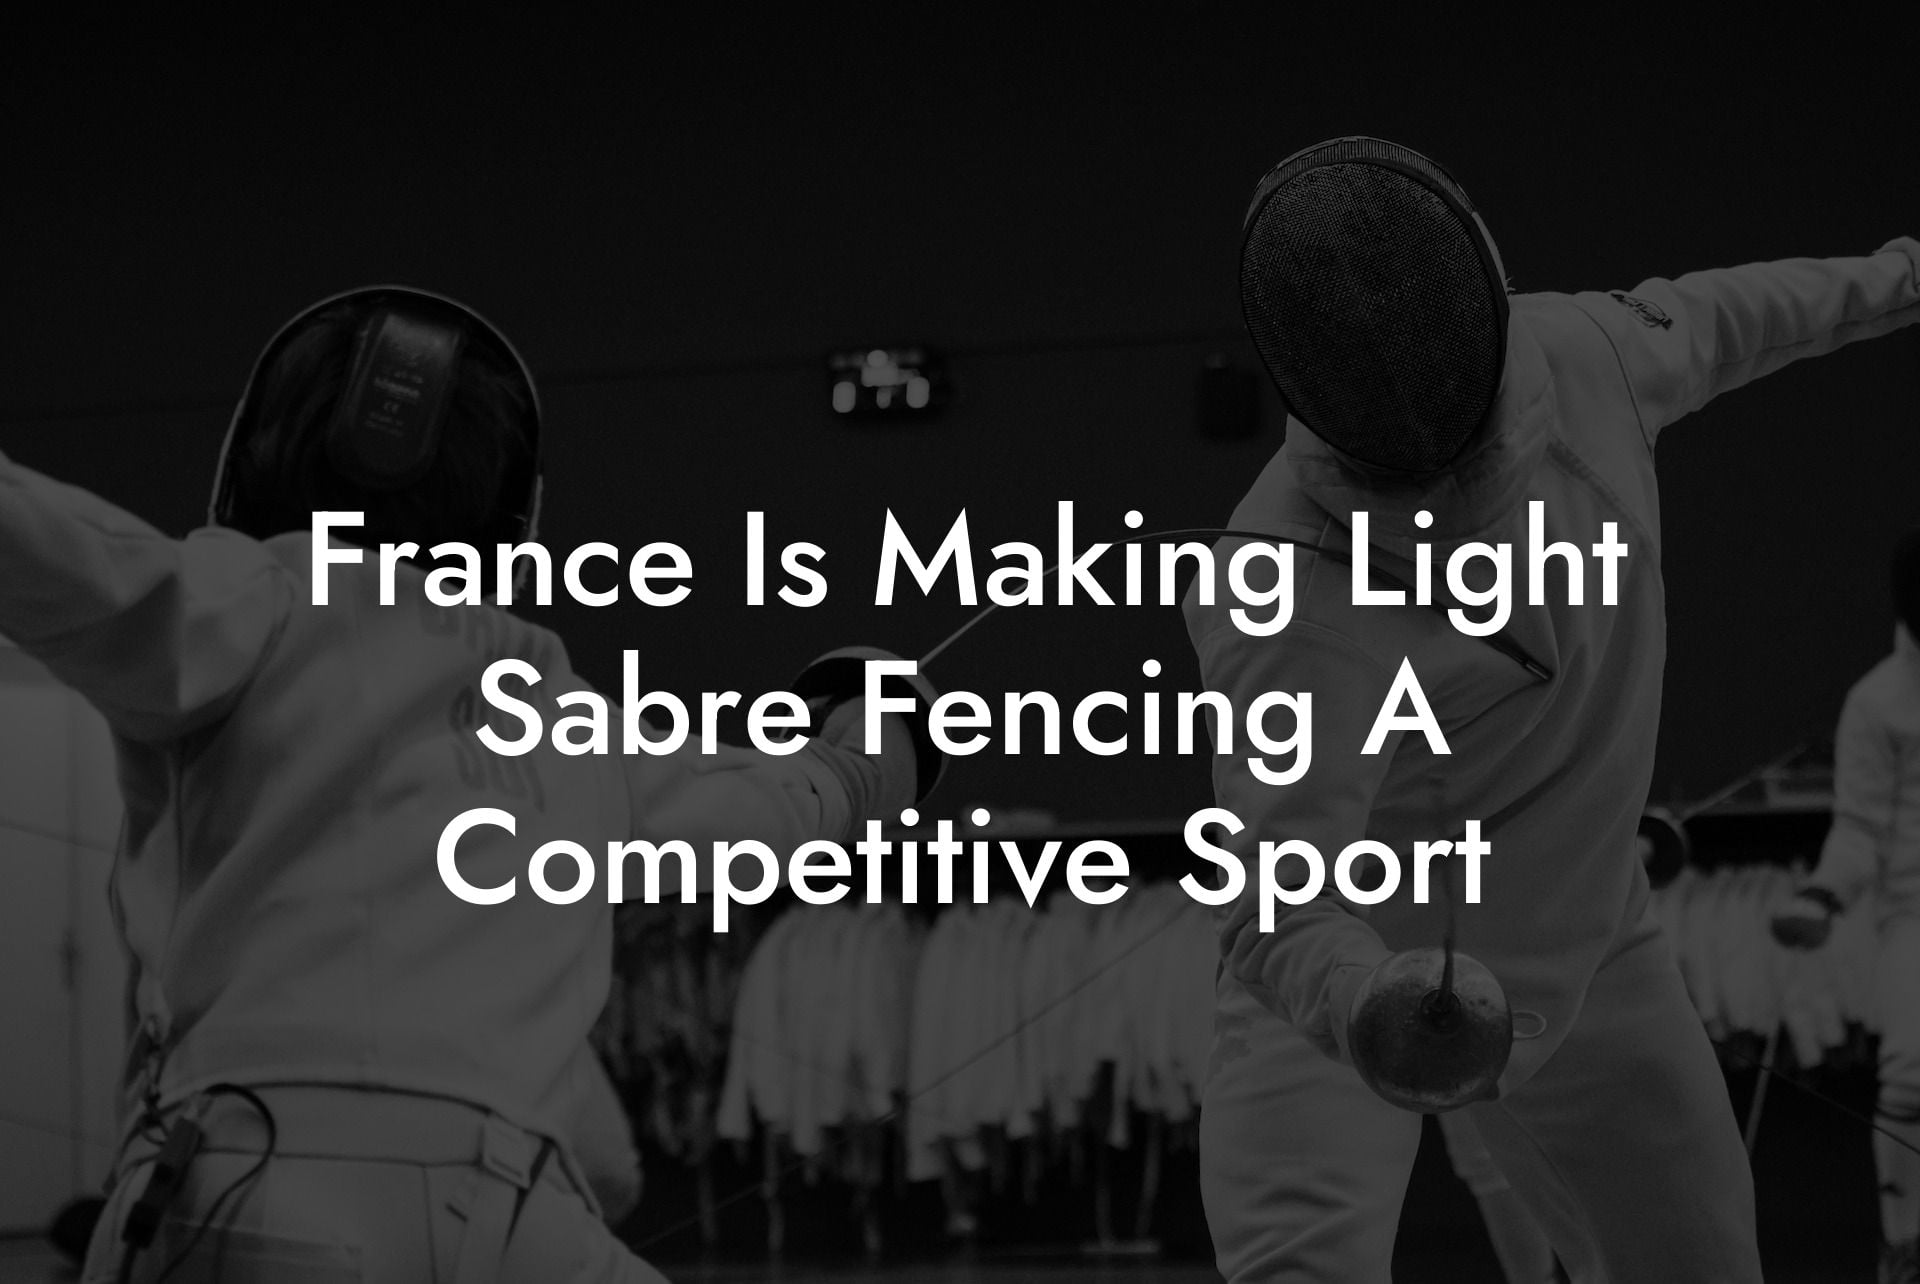 France Is Making Light Sabre Fencing A Competitive Sport